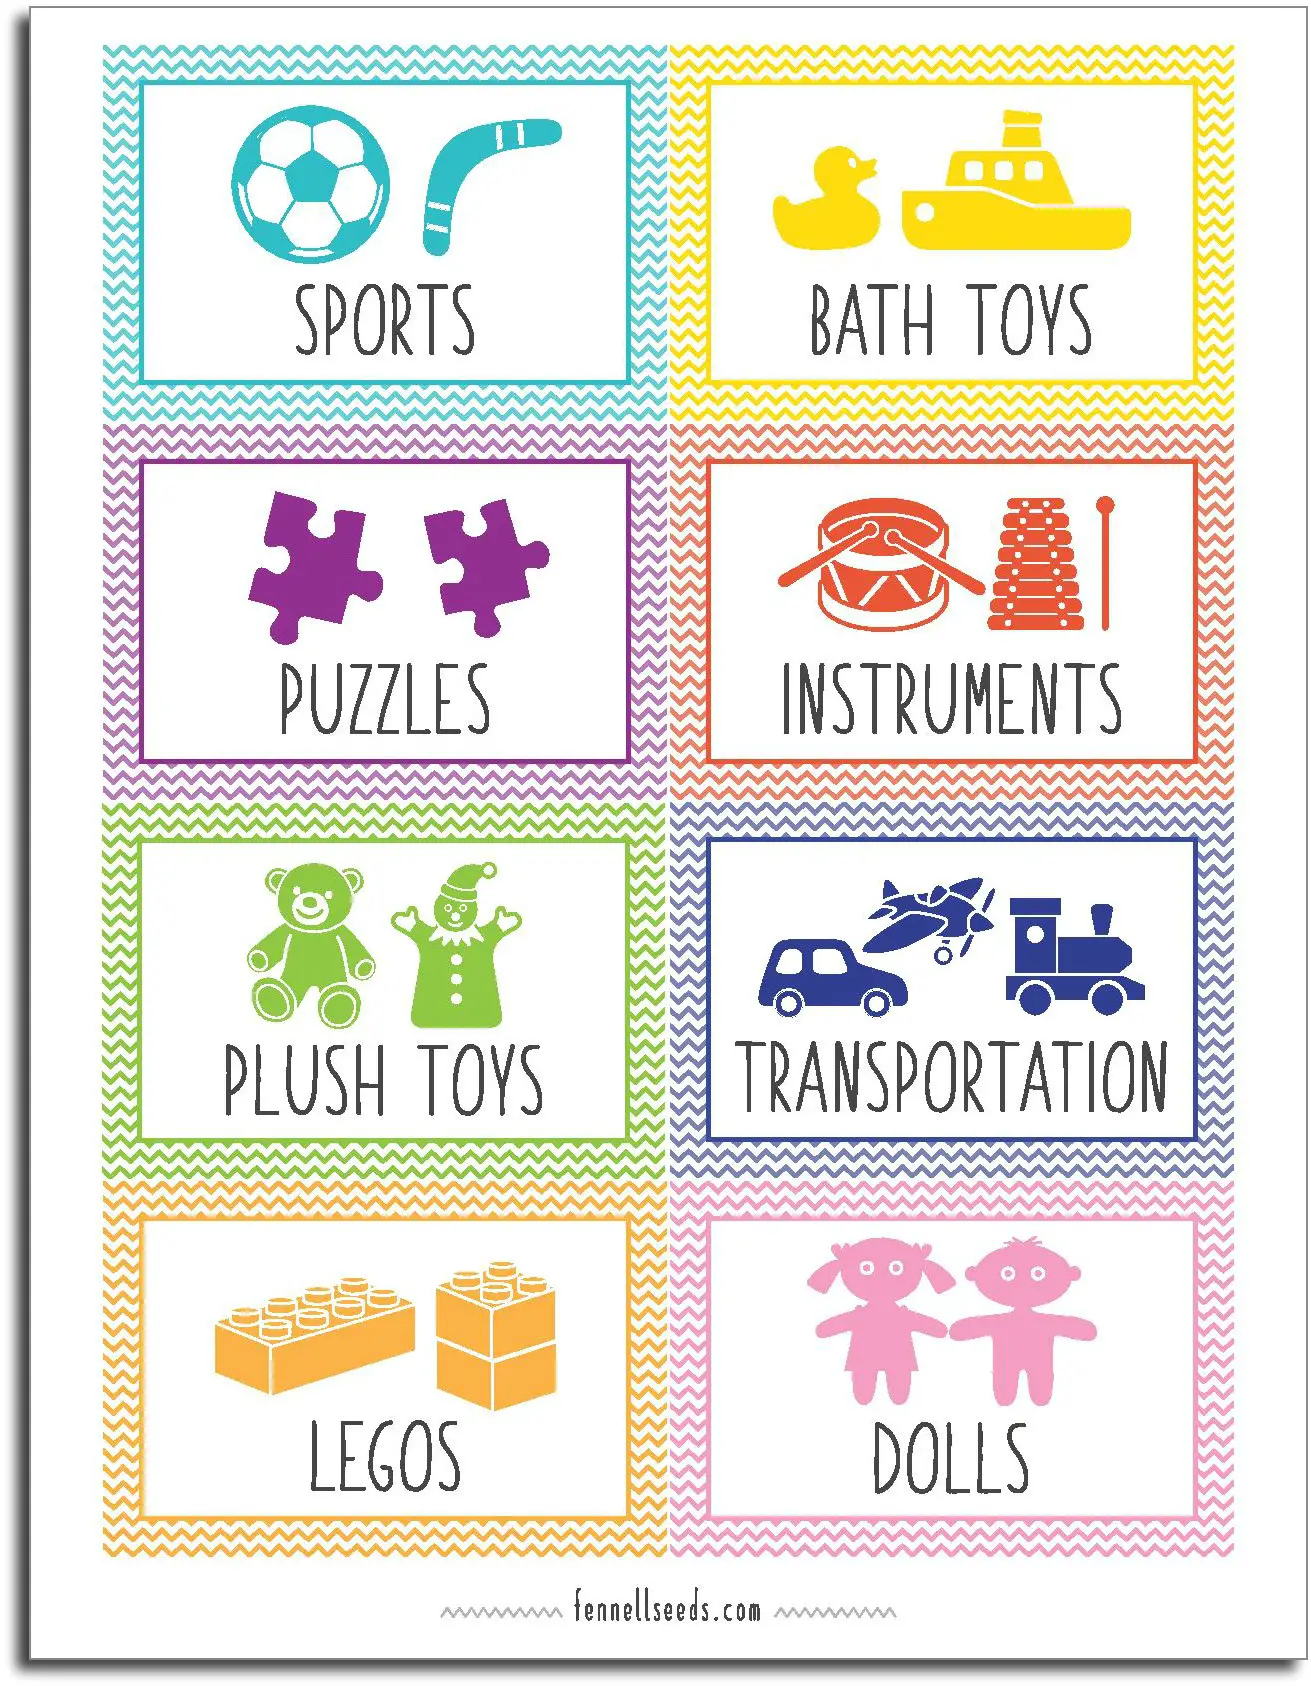 Printable Toy Bin Labels That Are Cute And Free